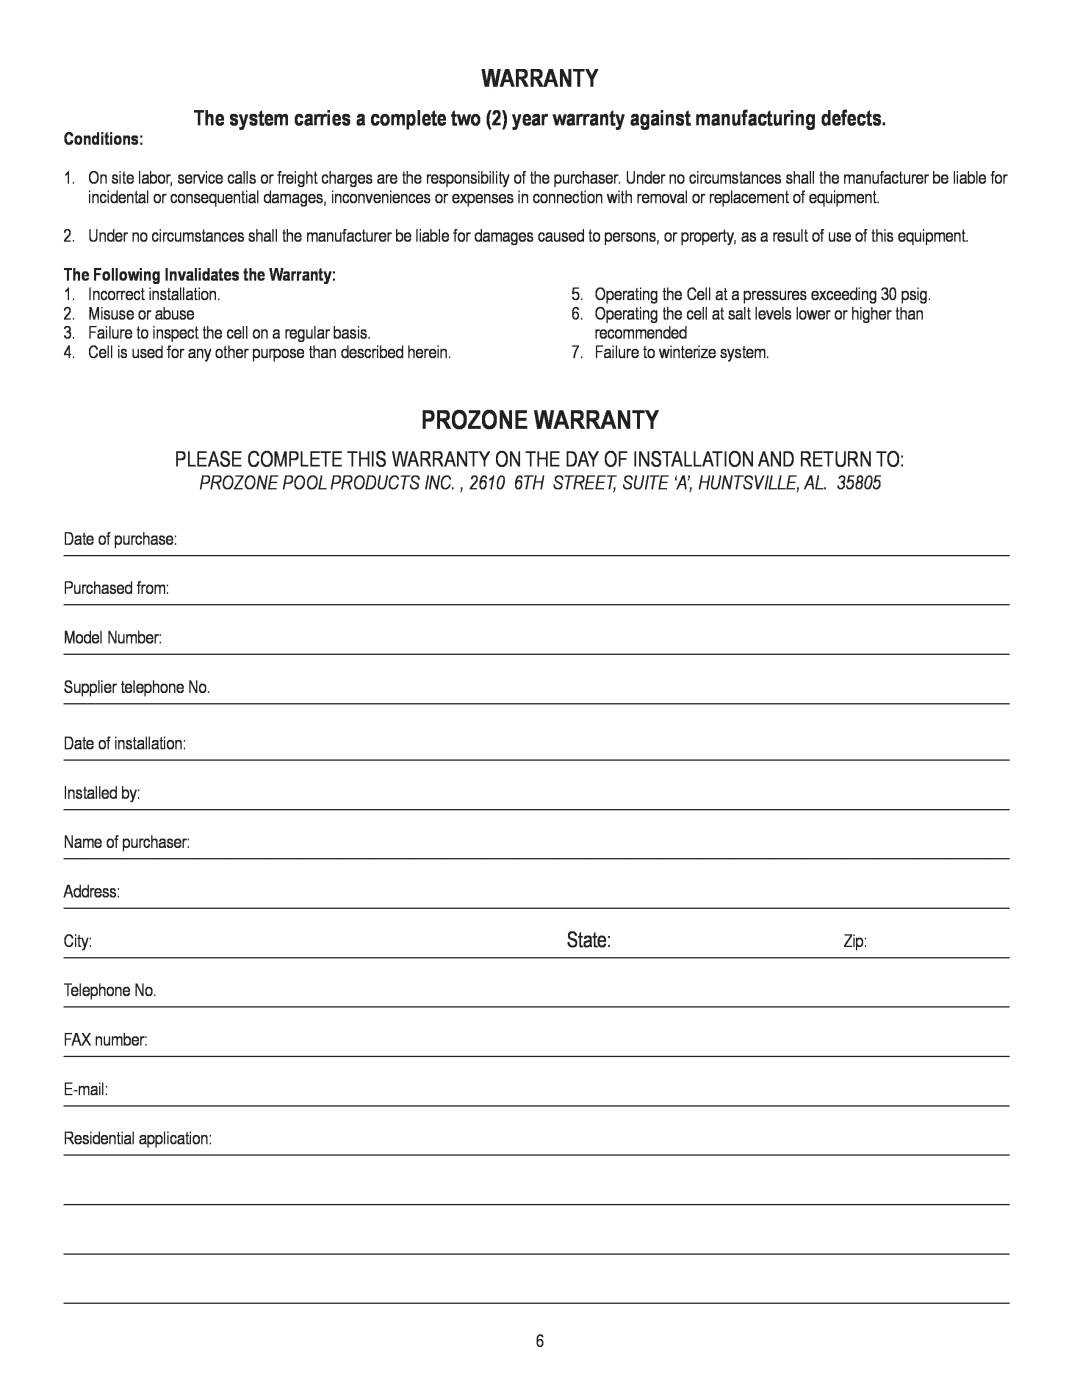 Prozone Pool Products CSS10 owner manual Prozone Warranty 